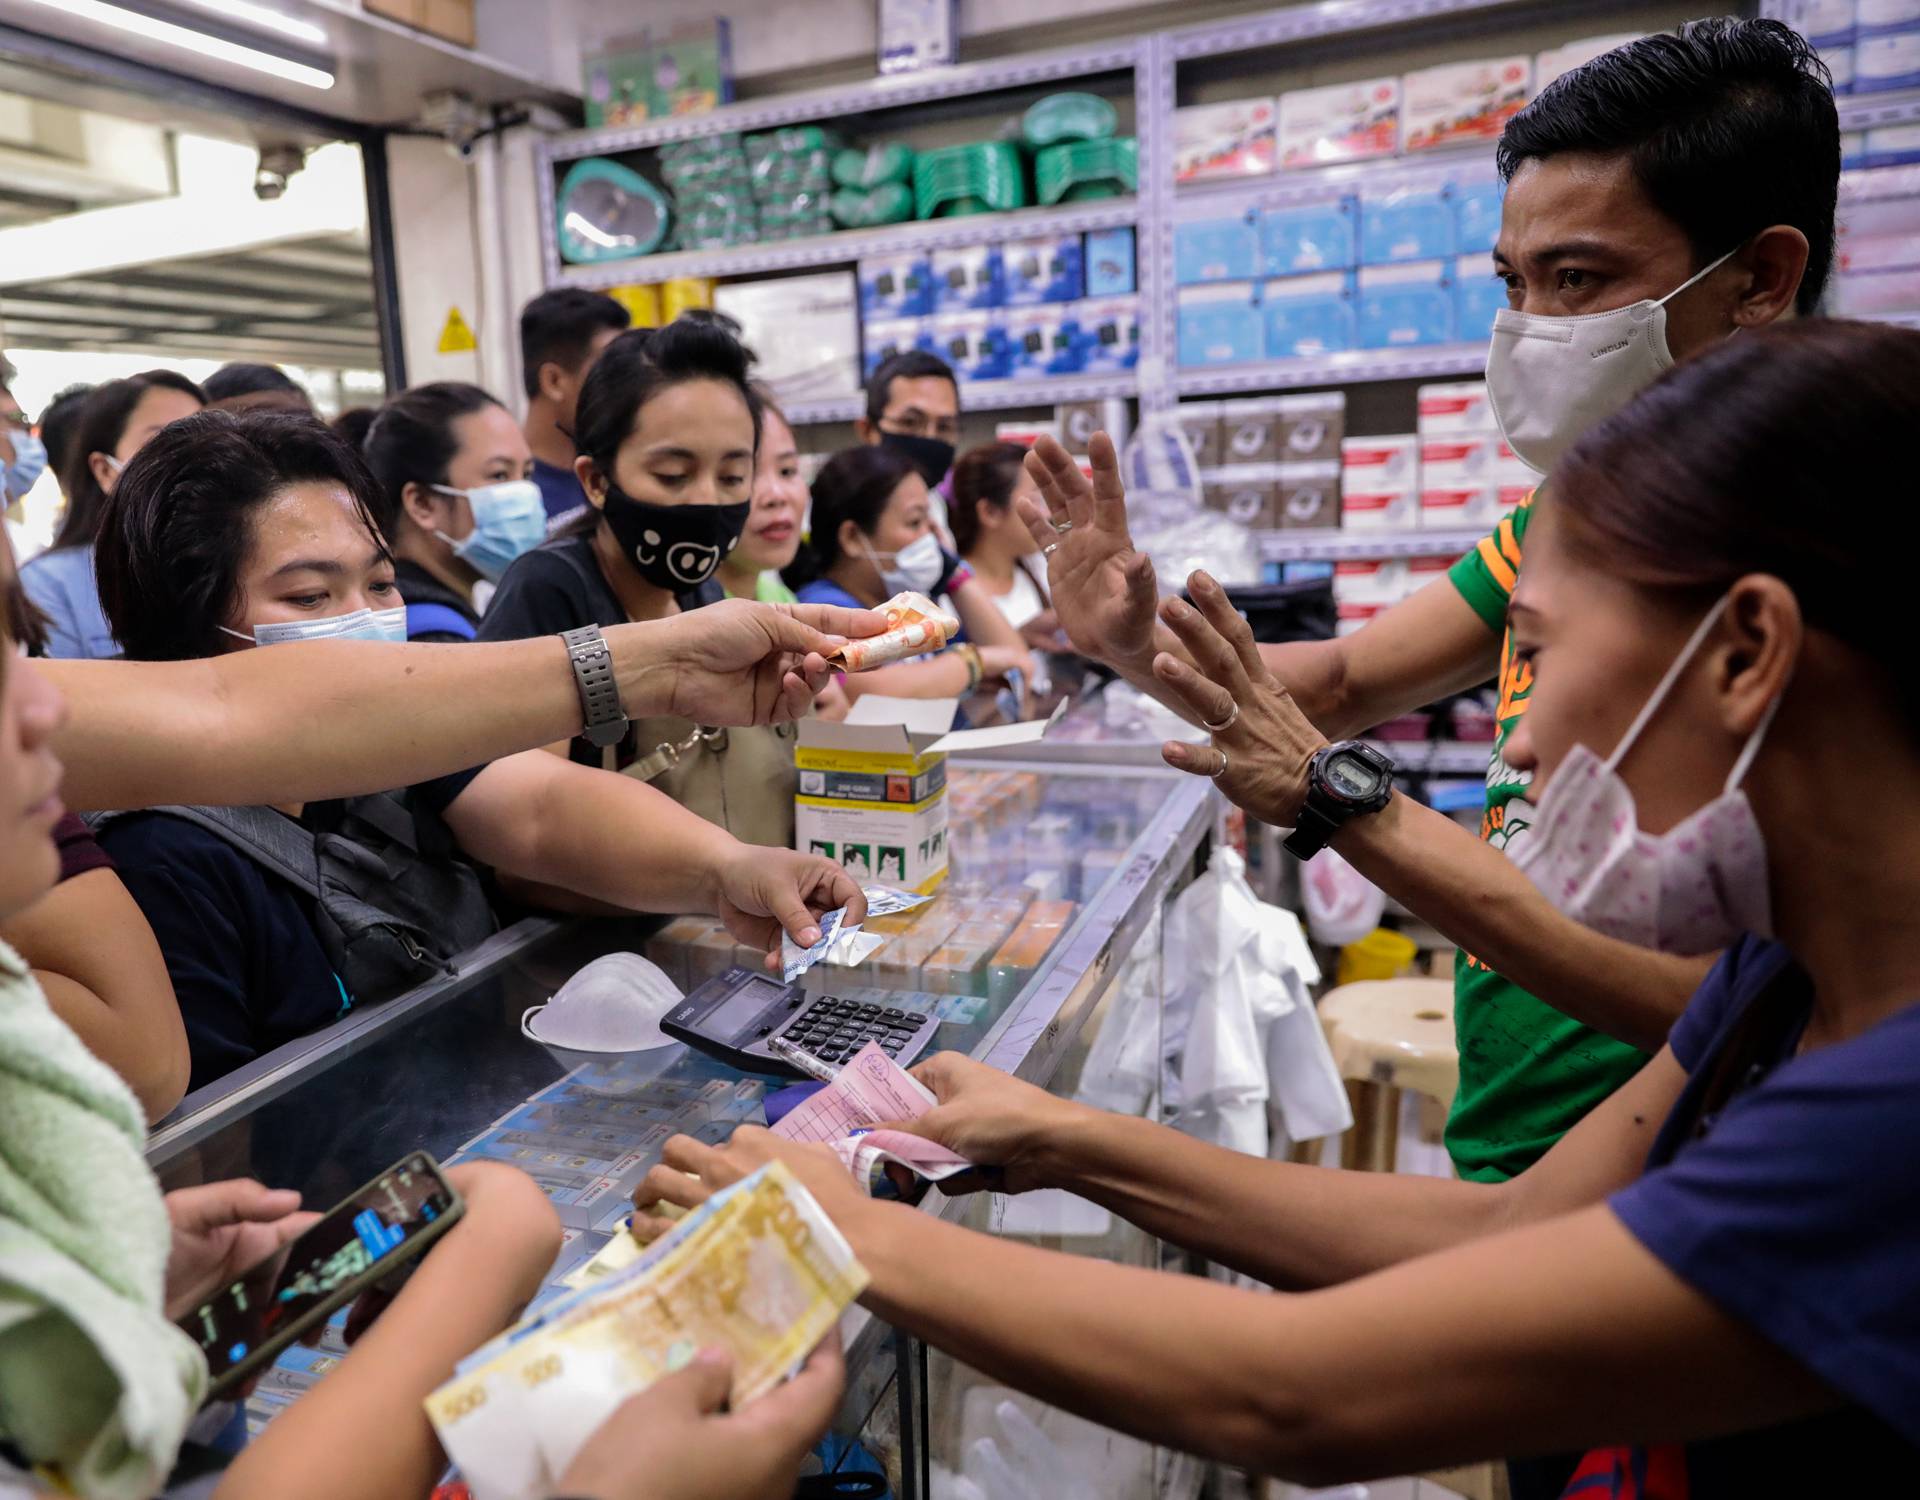 People scramble to buy face masks in a medical supply store a day after Philippine government confirmed first novel coronavirus case